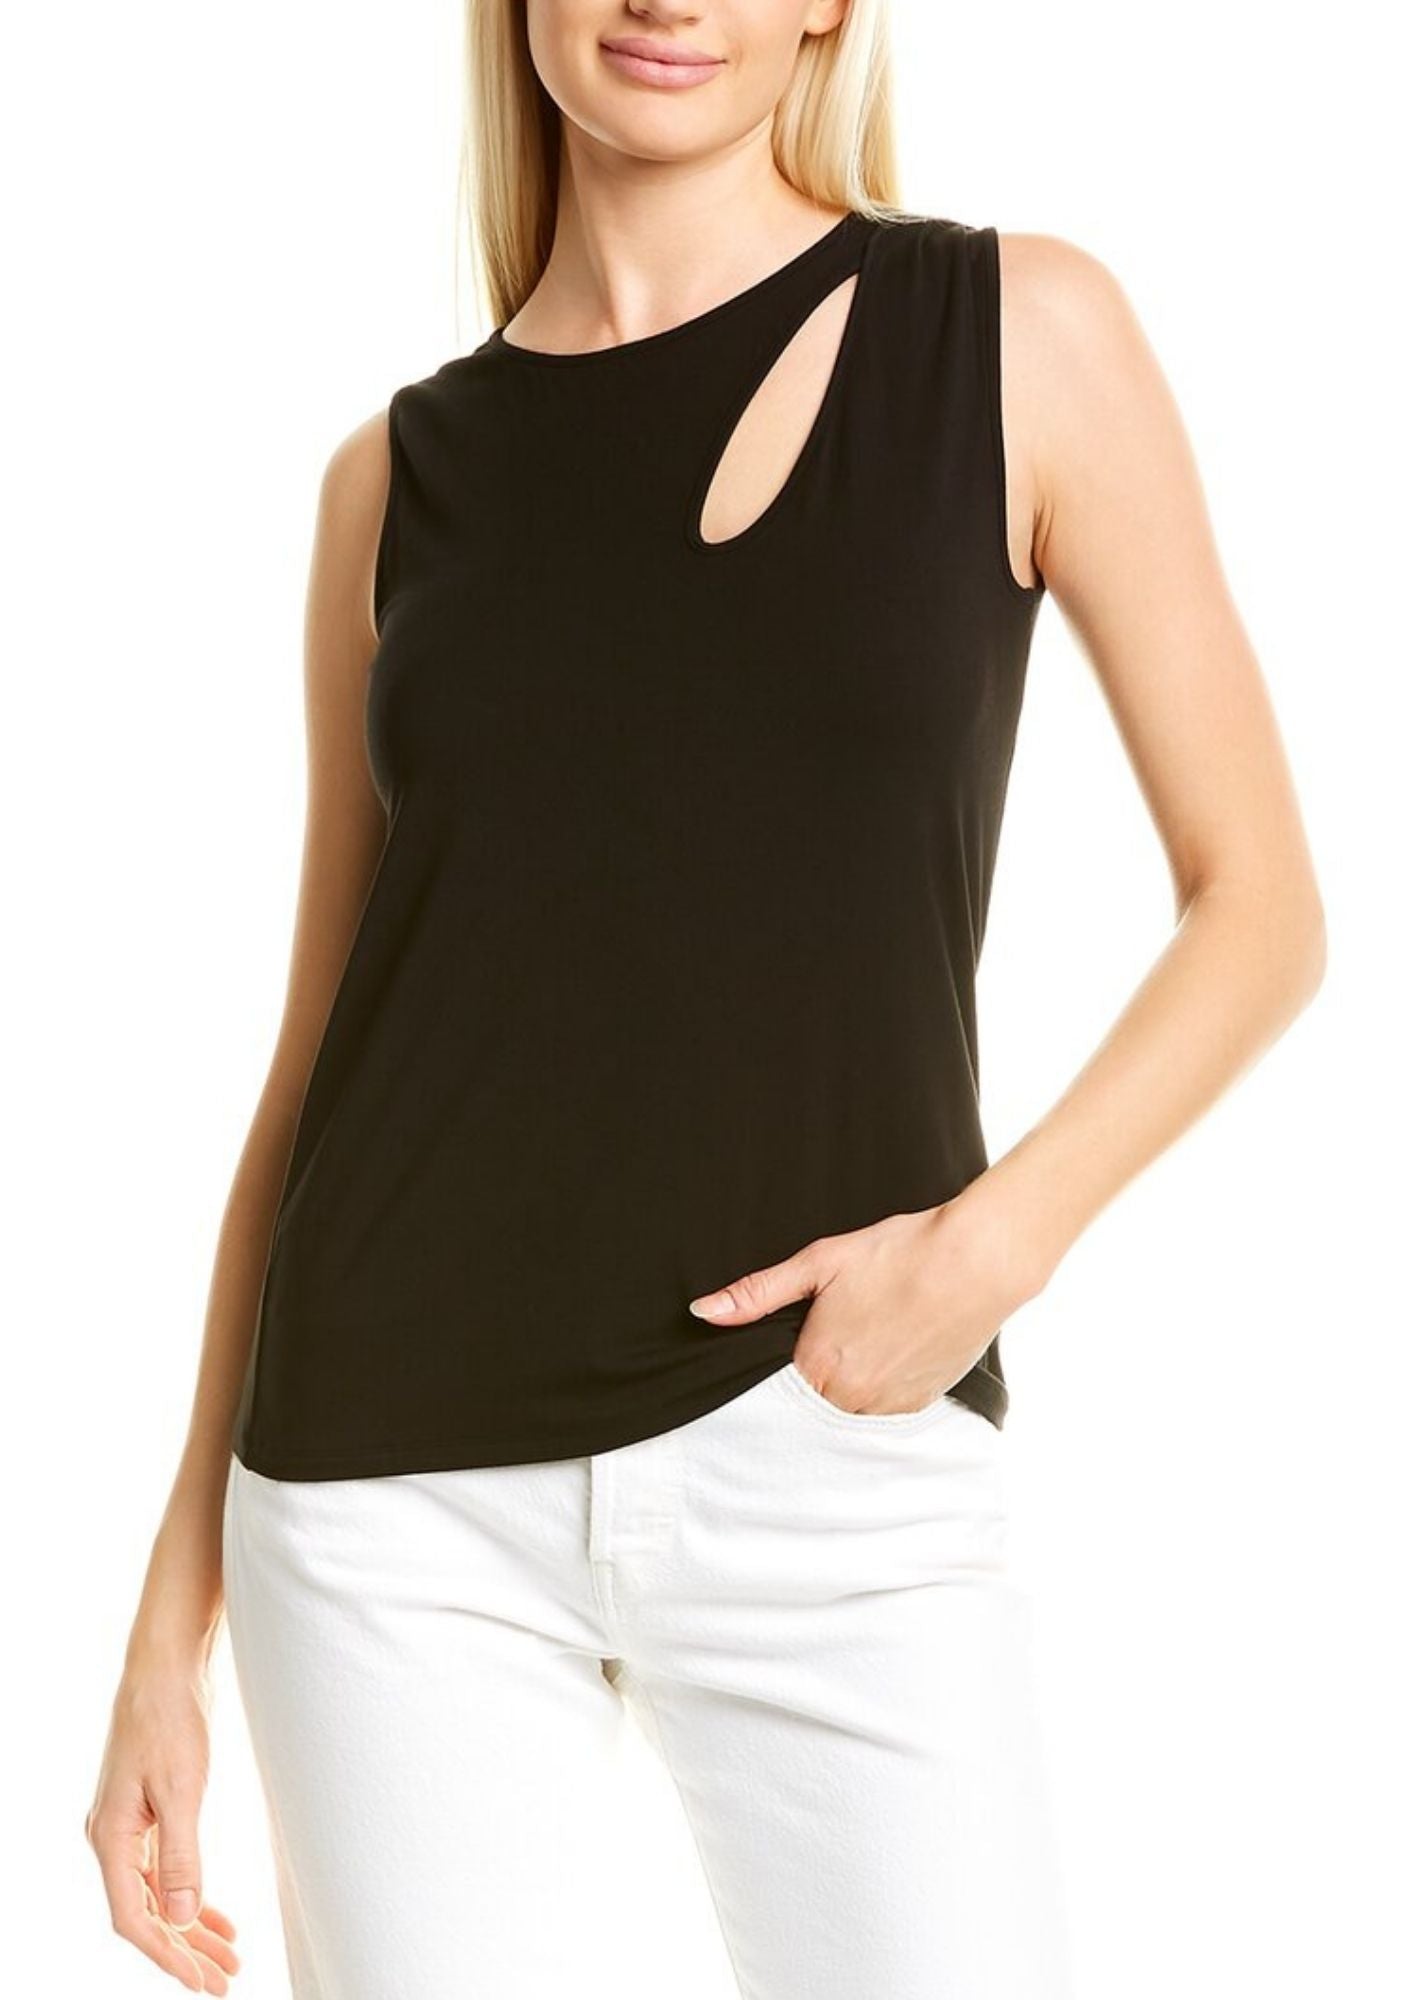 Black Cut Out at Shoulder Sleeveless Top